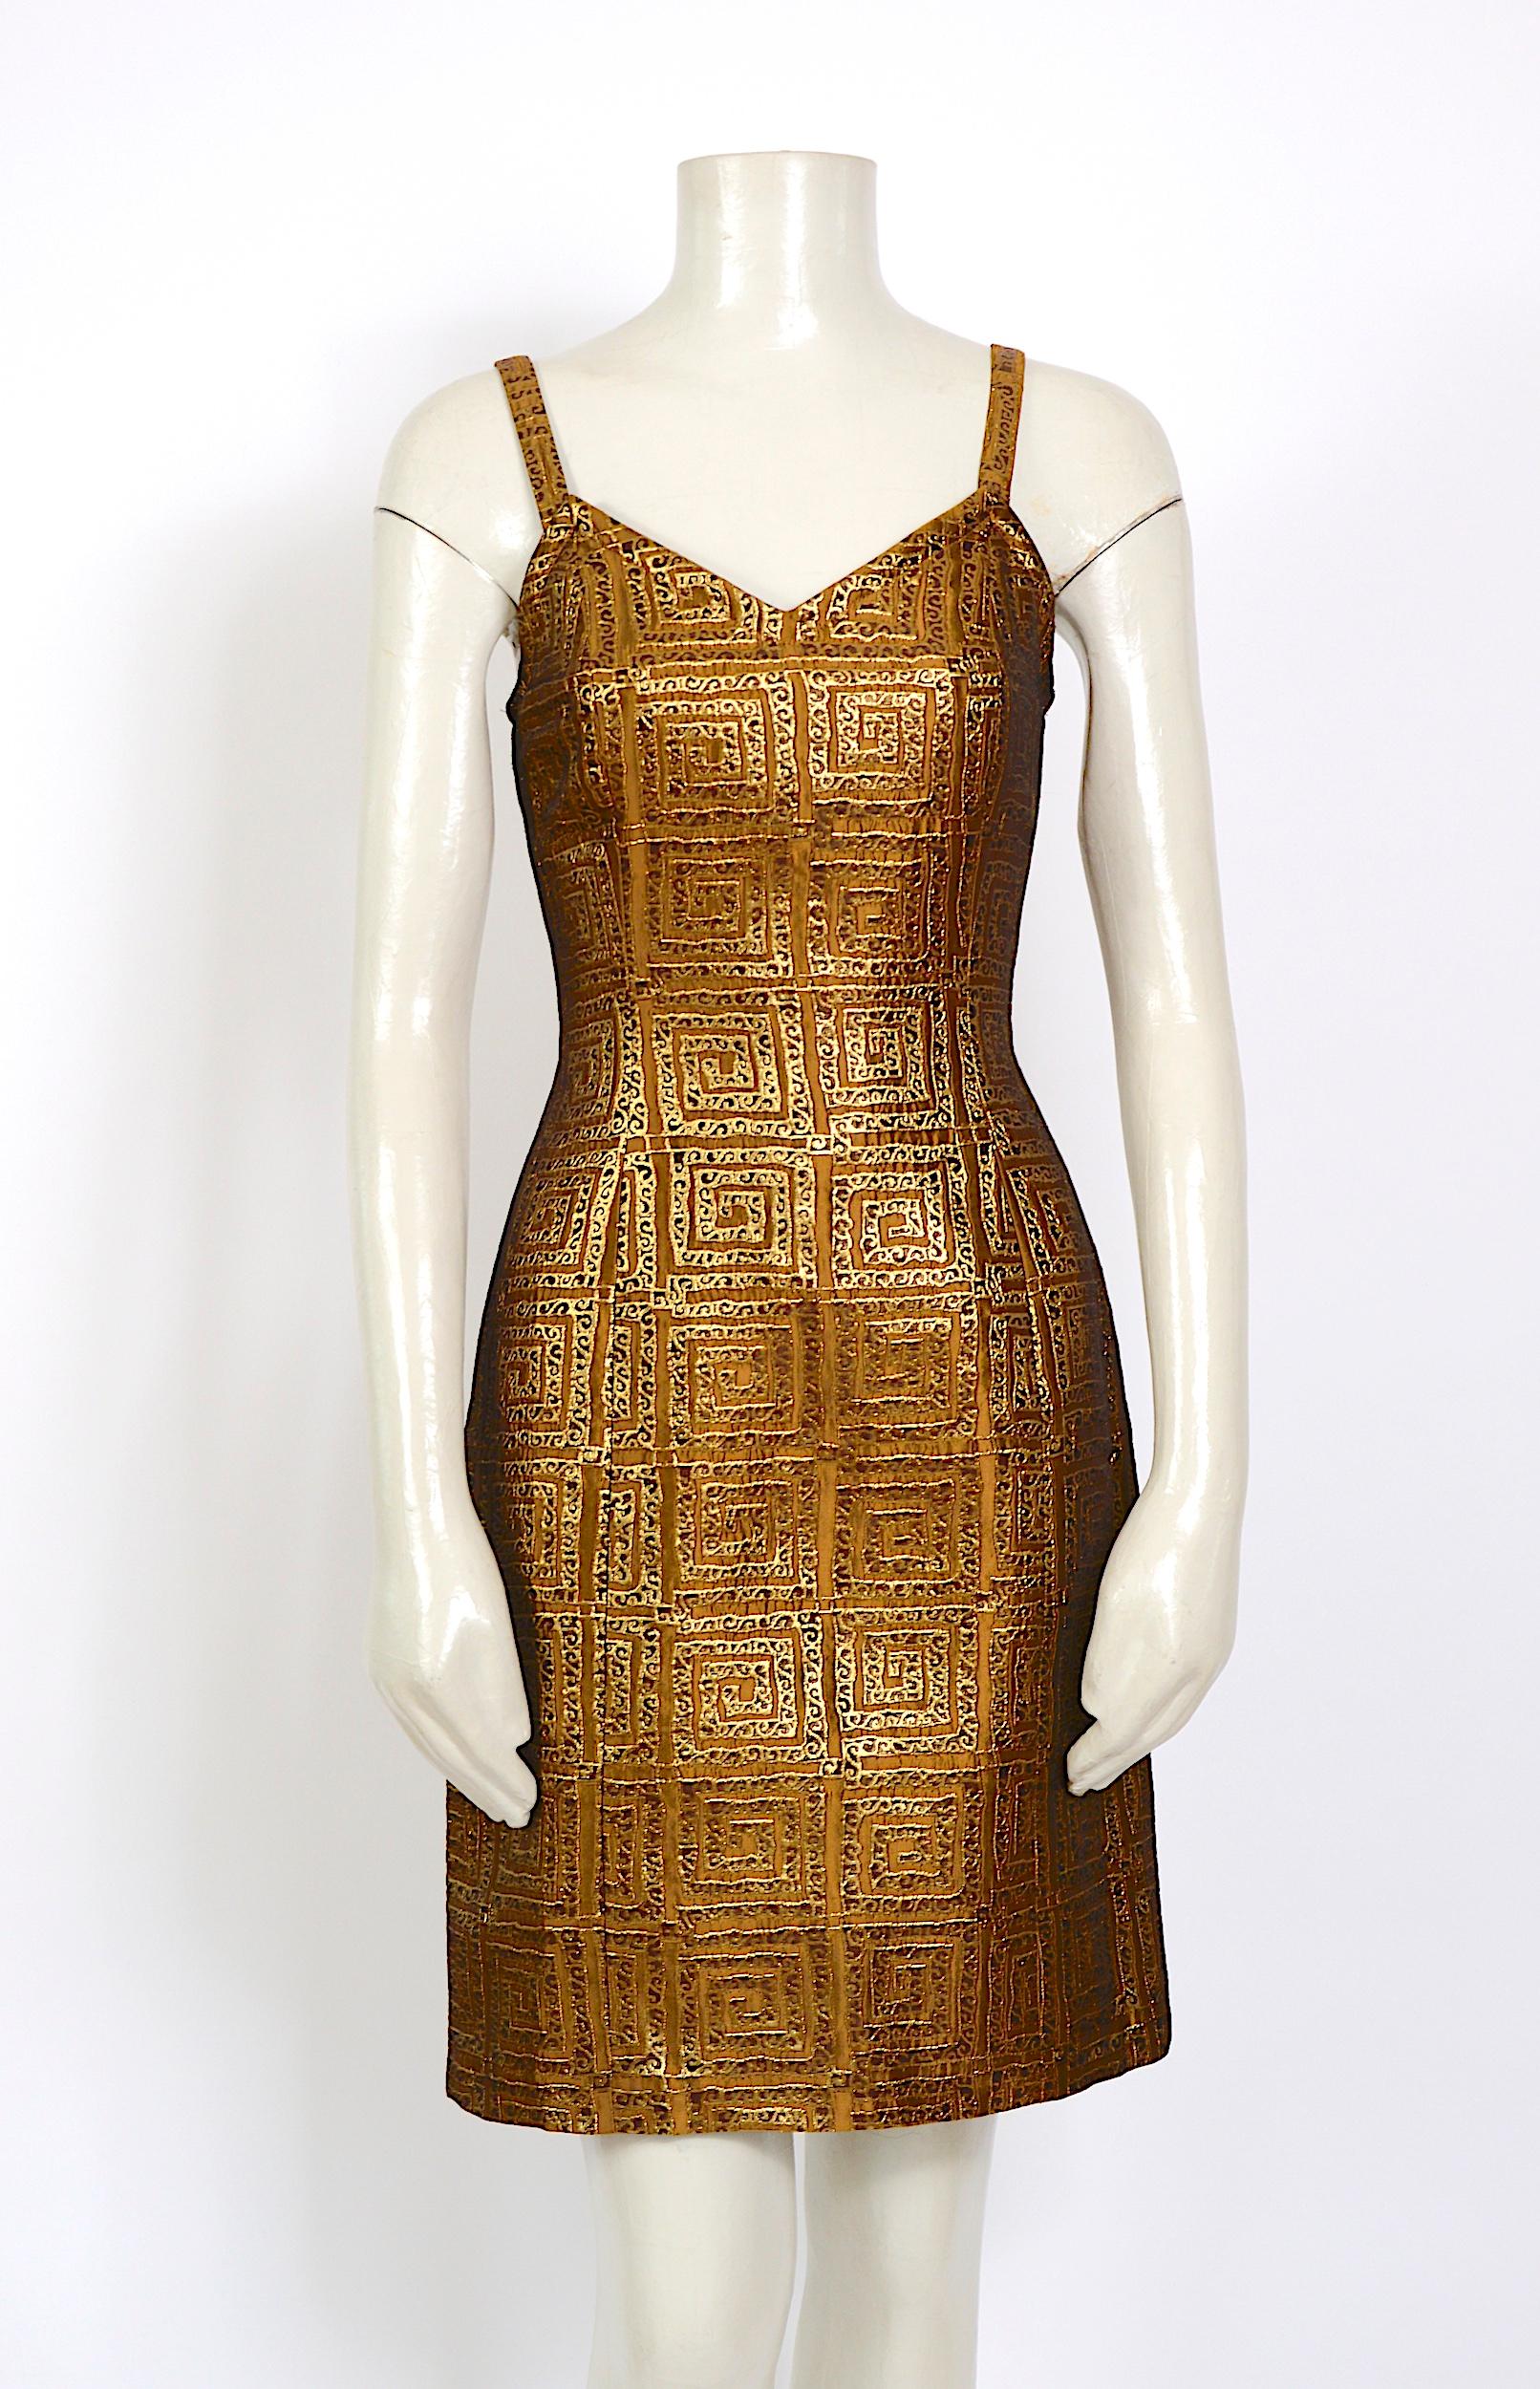 Givenchy vintage gold logo dress that dates from the 90s or 80s 
Fully lined. 
Made in France
Excellent condition 
Closes at the back with a zipping. The fabric is a mix of metal - viscose, and polyester
There is no size label, and we fitted the